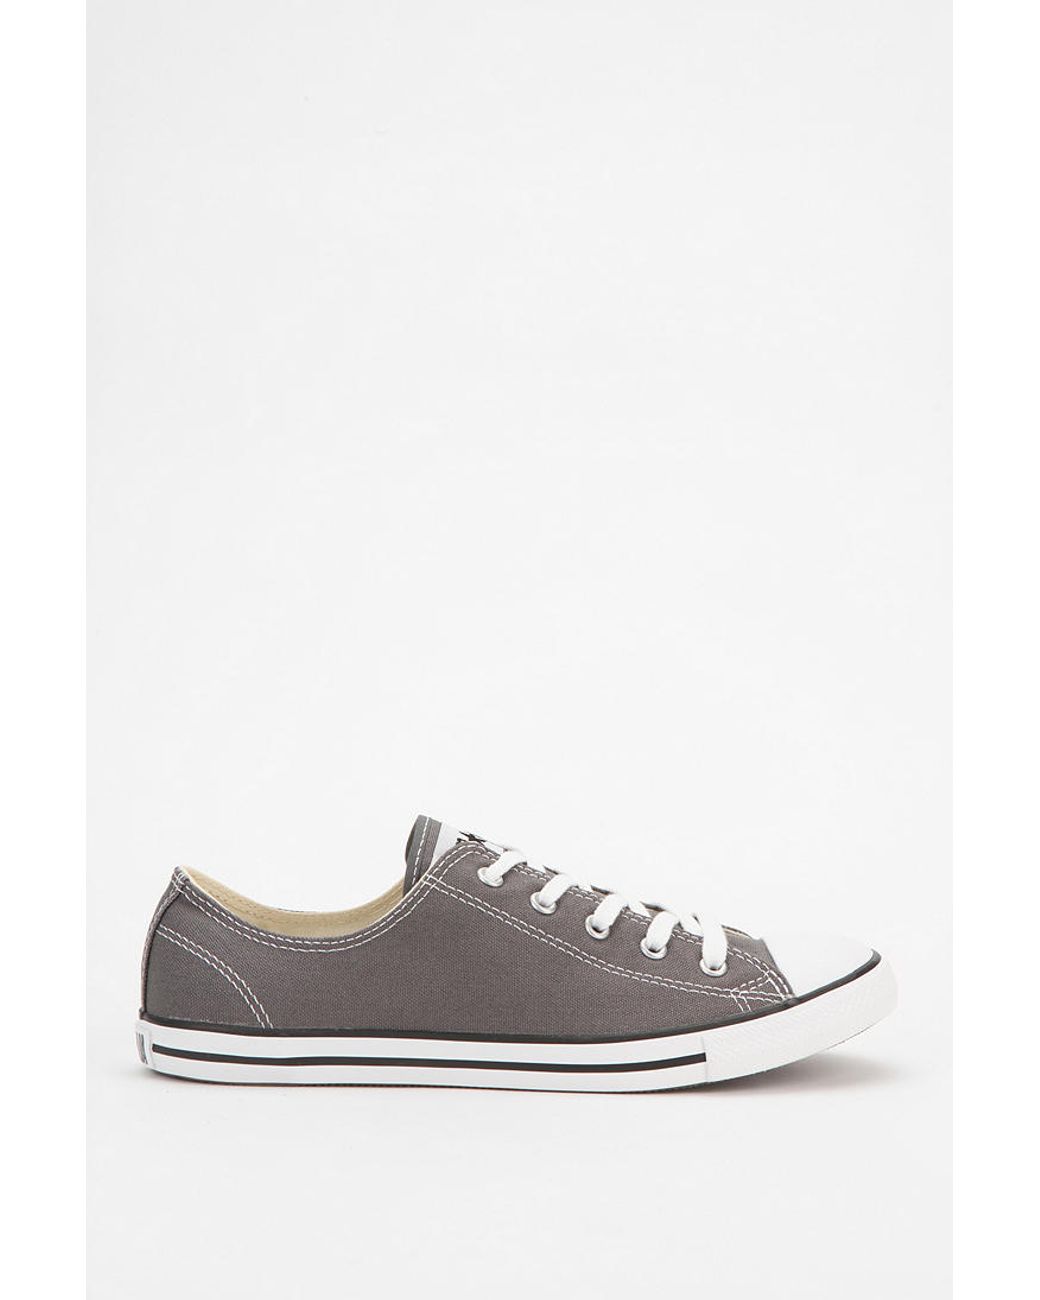 Converse Taylor All Star Dainty Womens Canvas Sneaker in Gray |